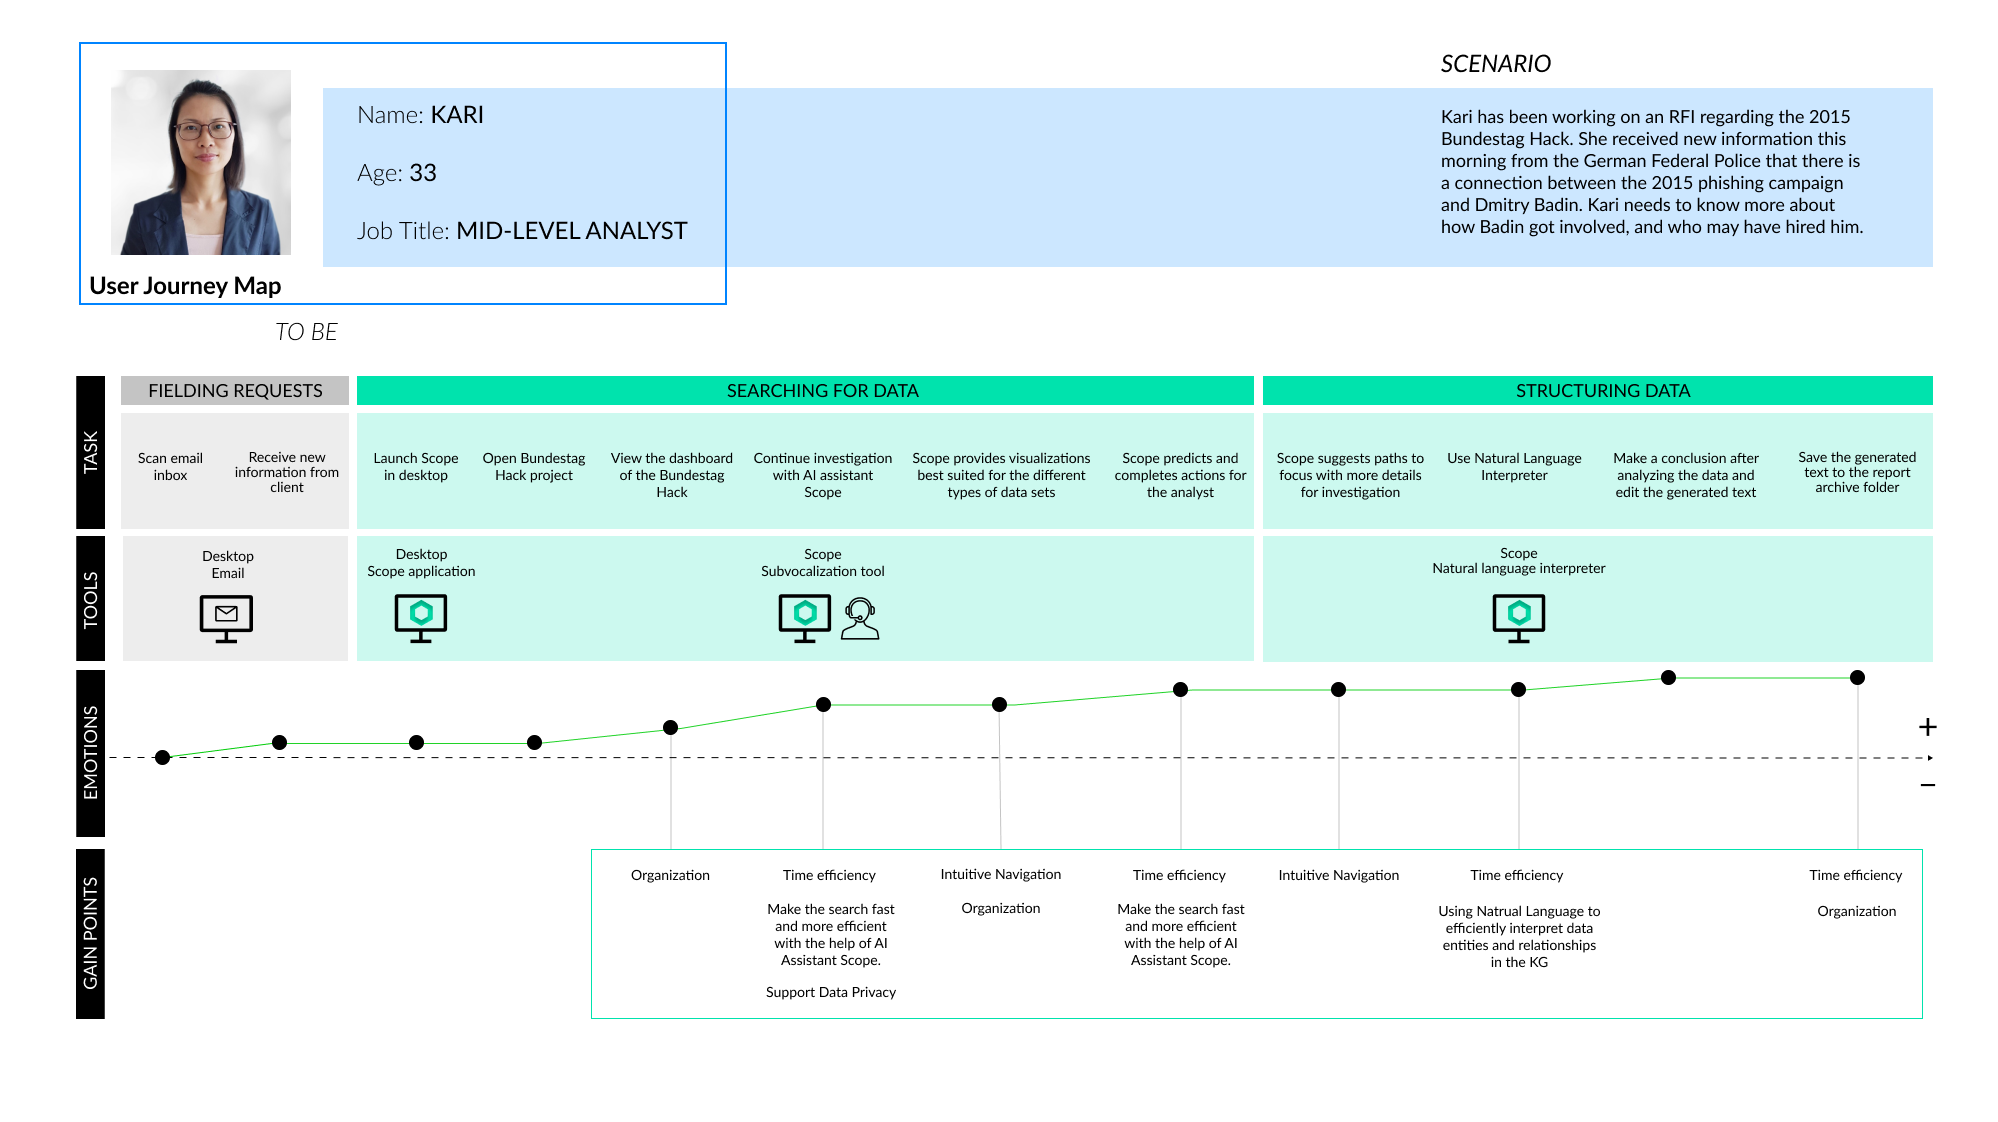 To be user journey map image